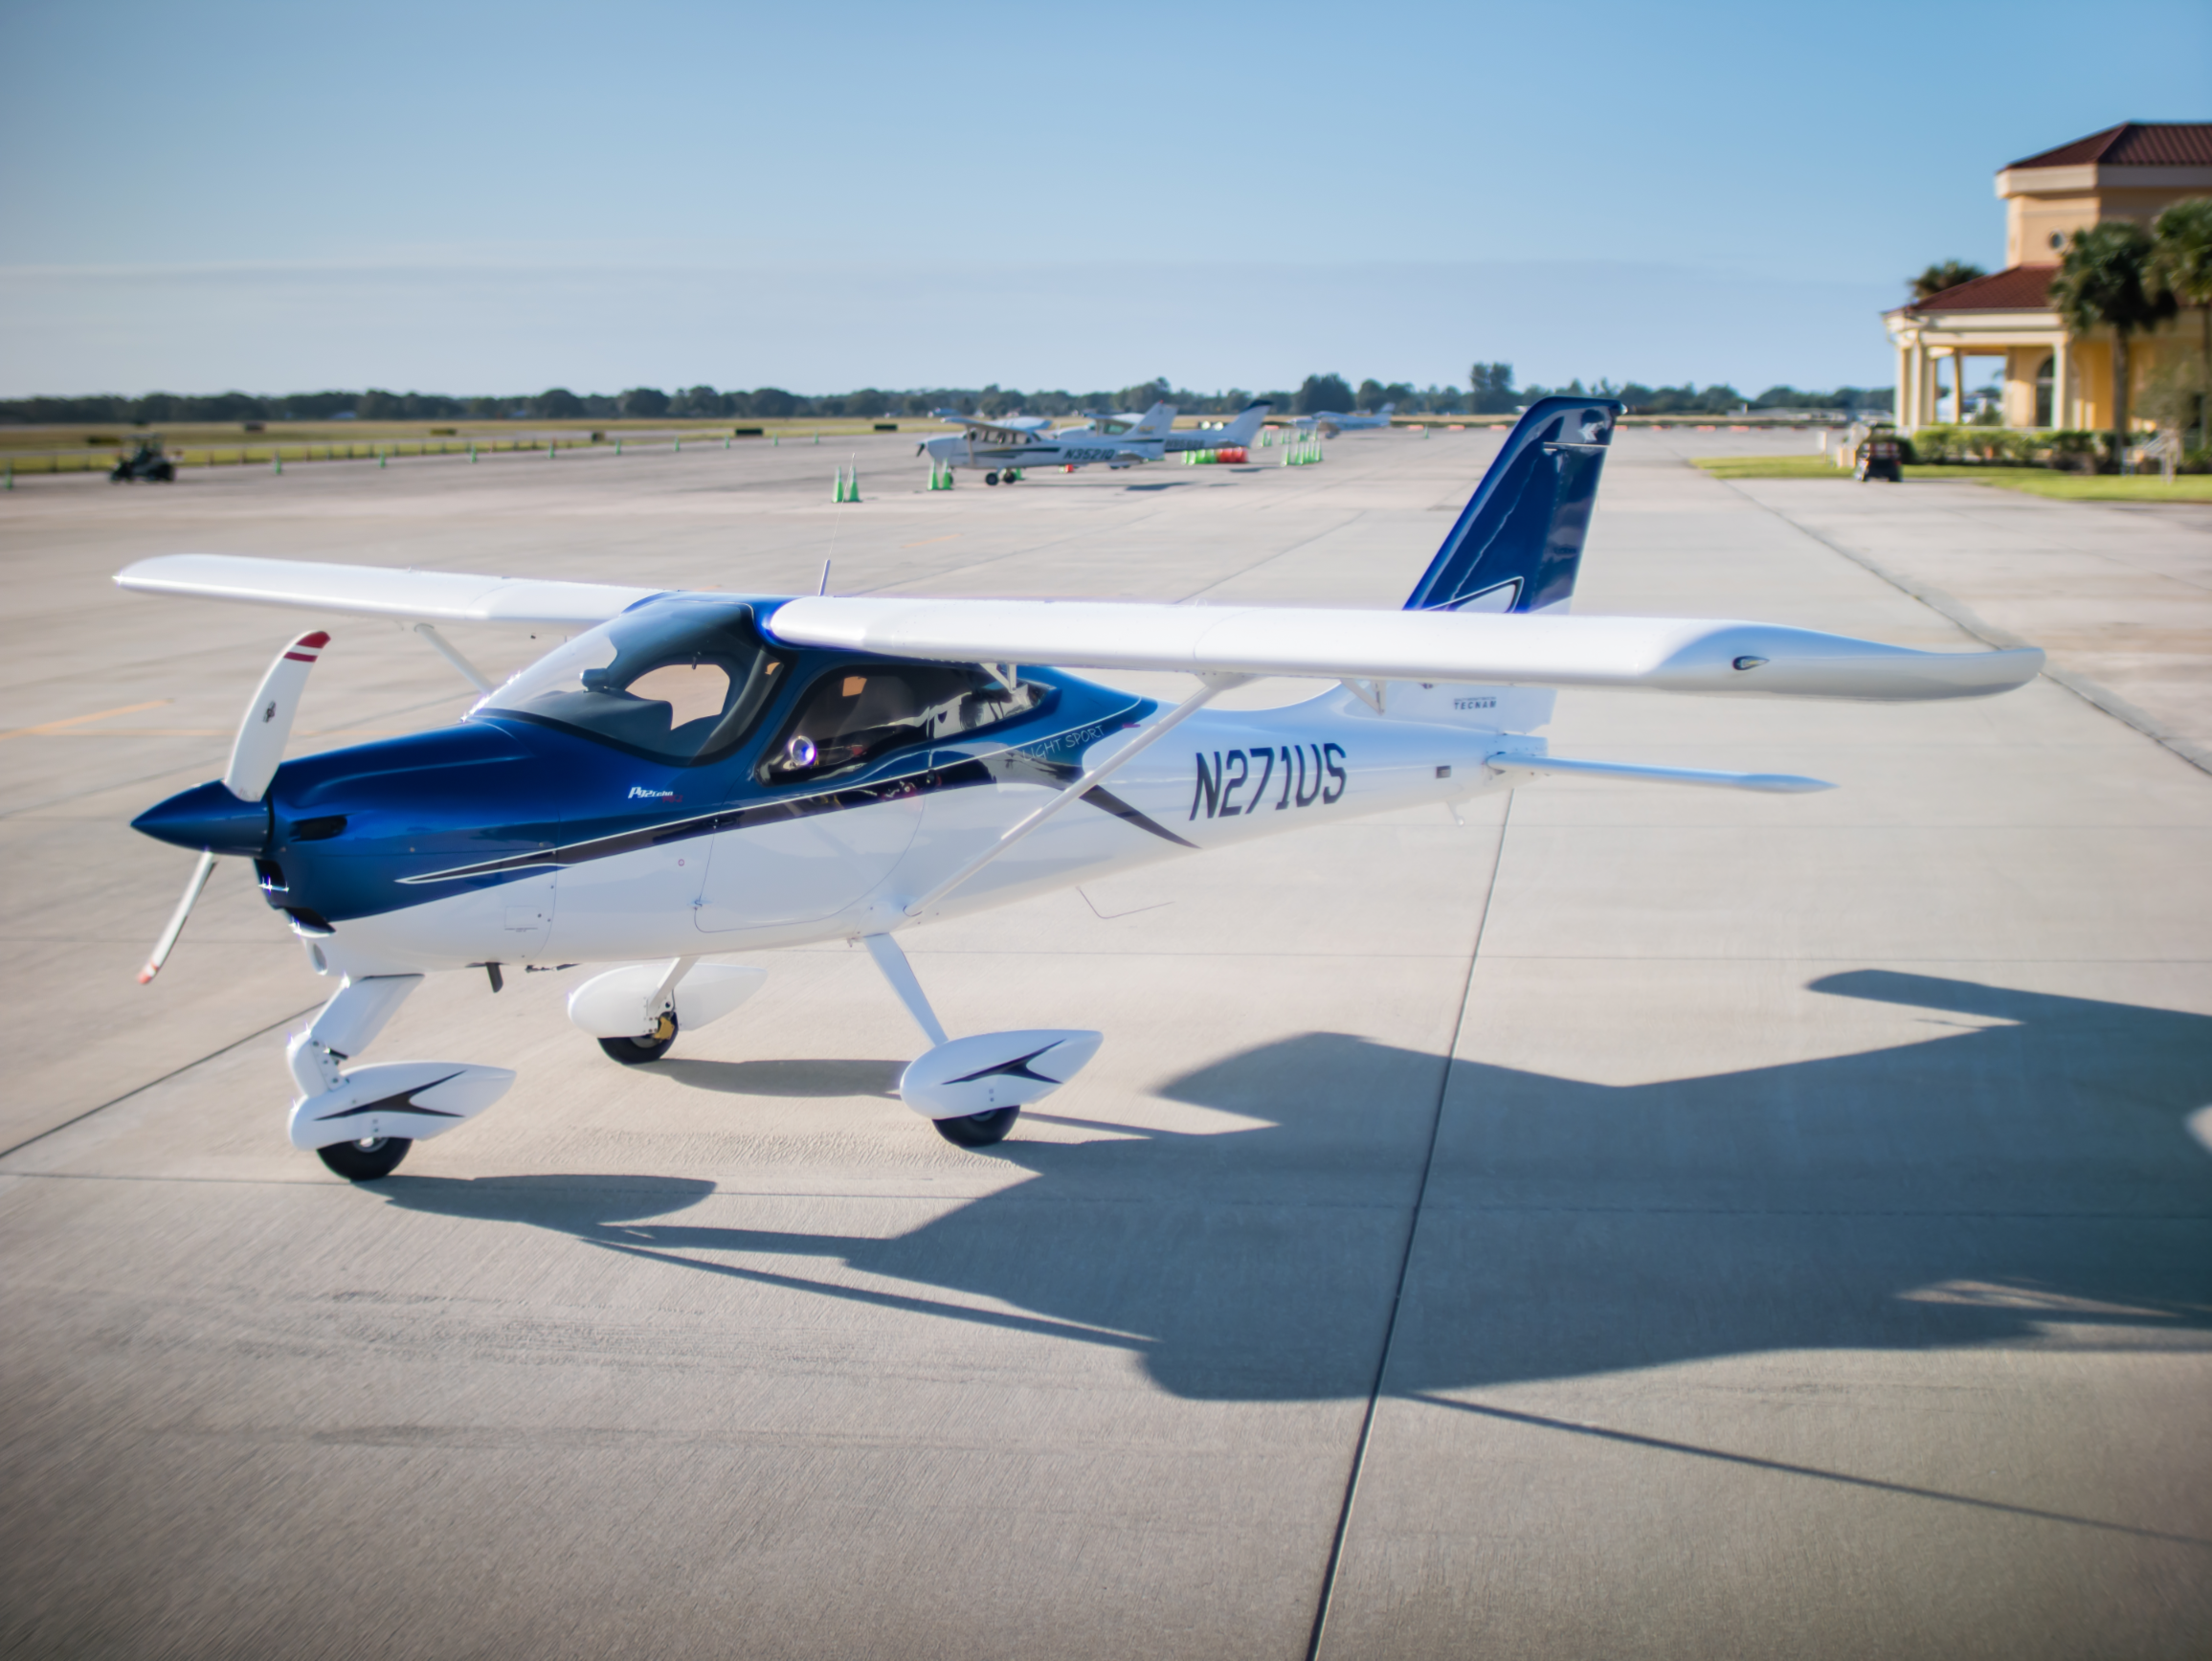 Tecnam to Bring Performance for Embry-Riddle’s Flight Team